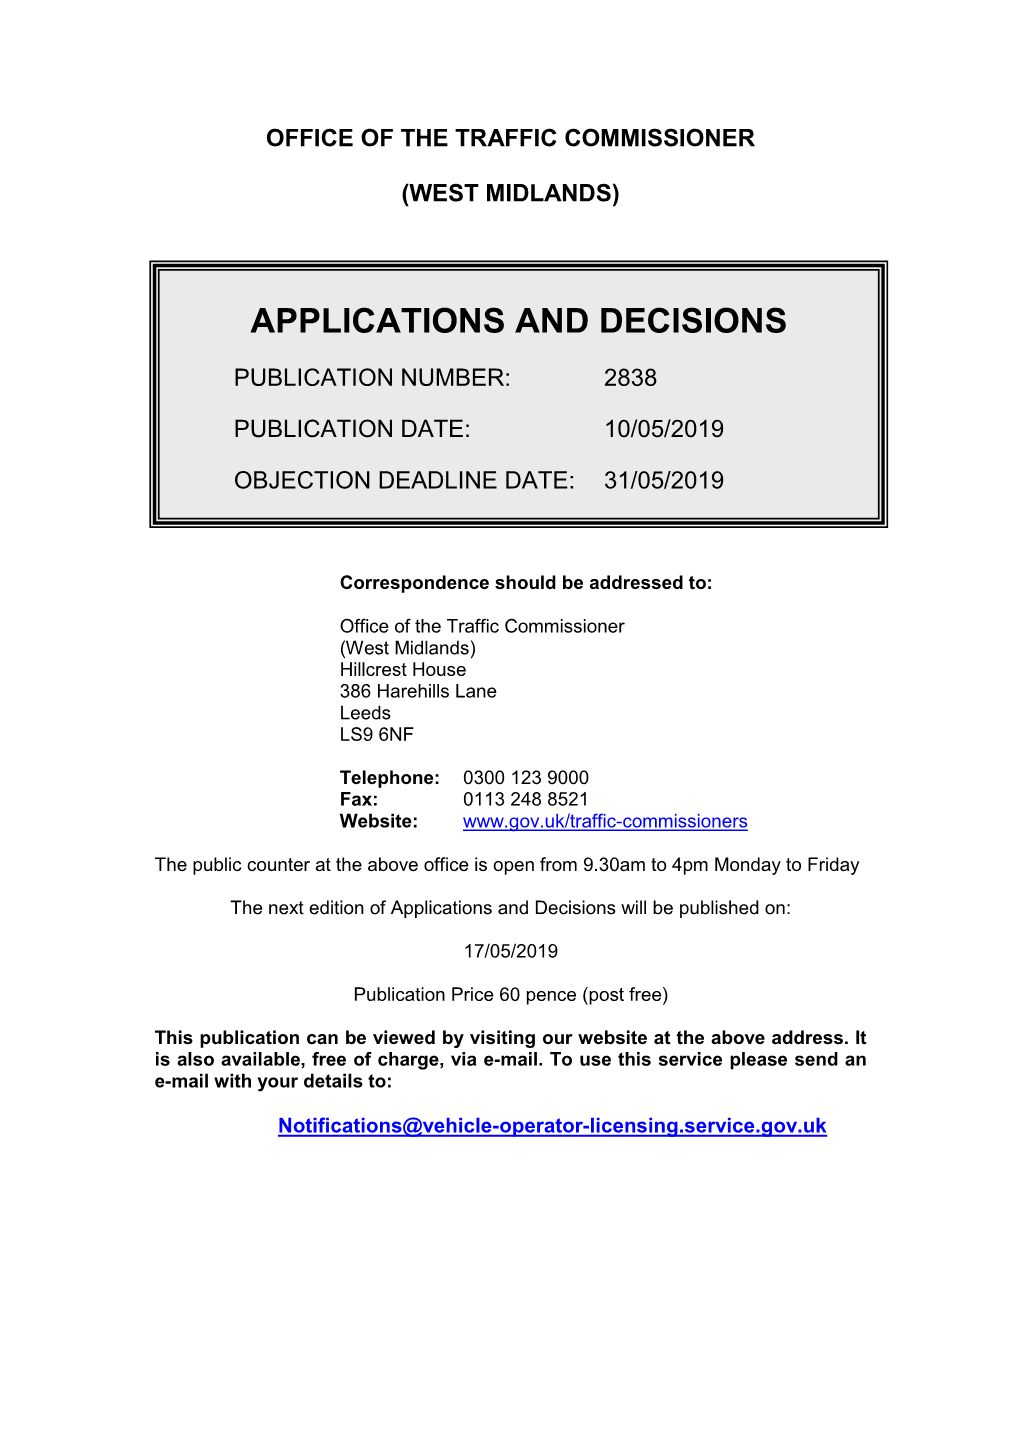 Applicationsa and Decisions for West Midlands